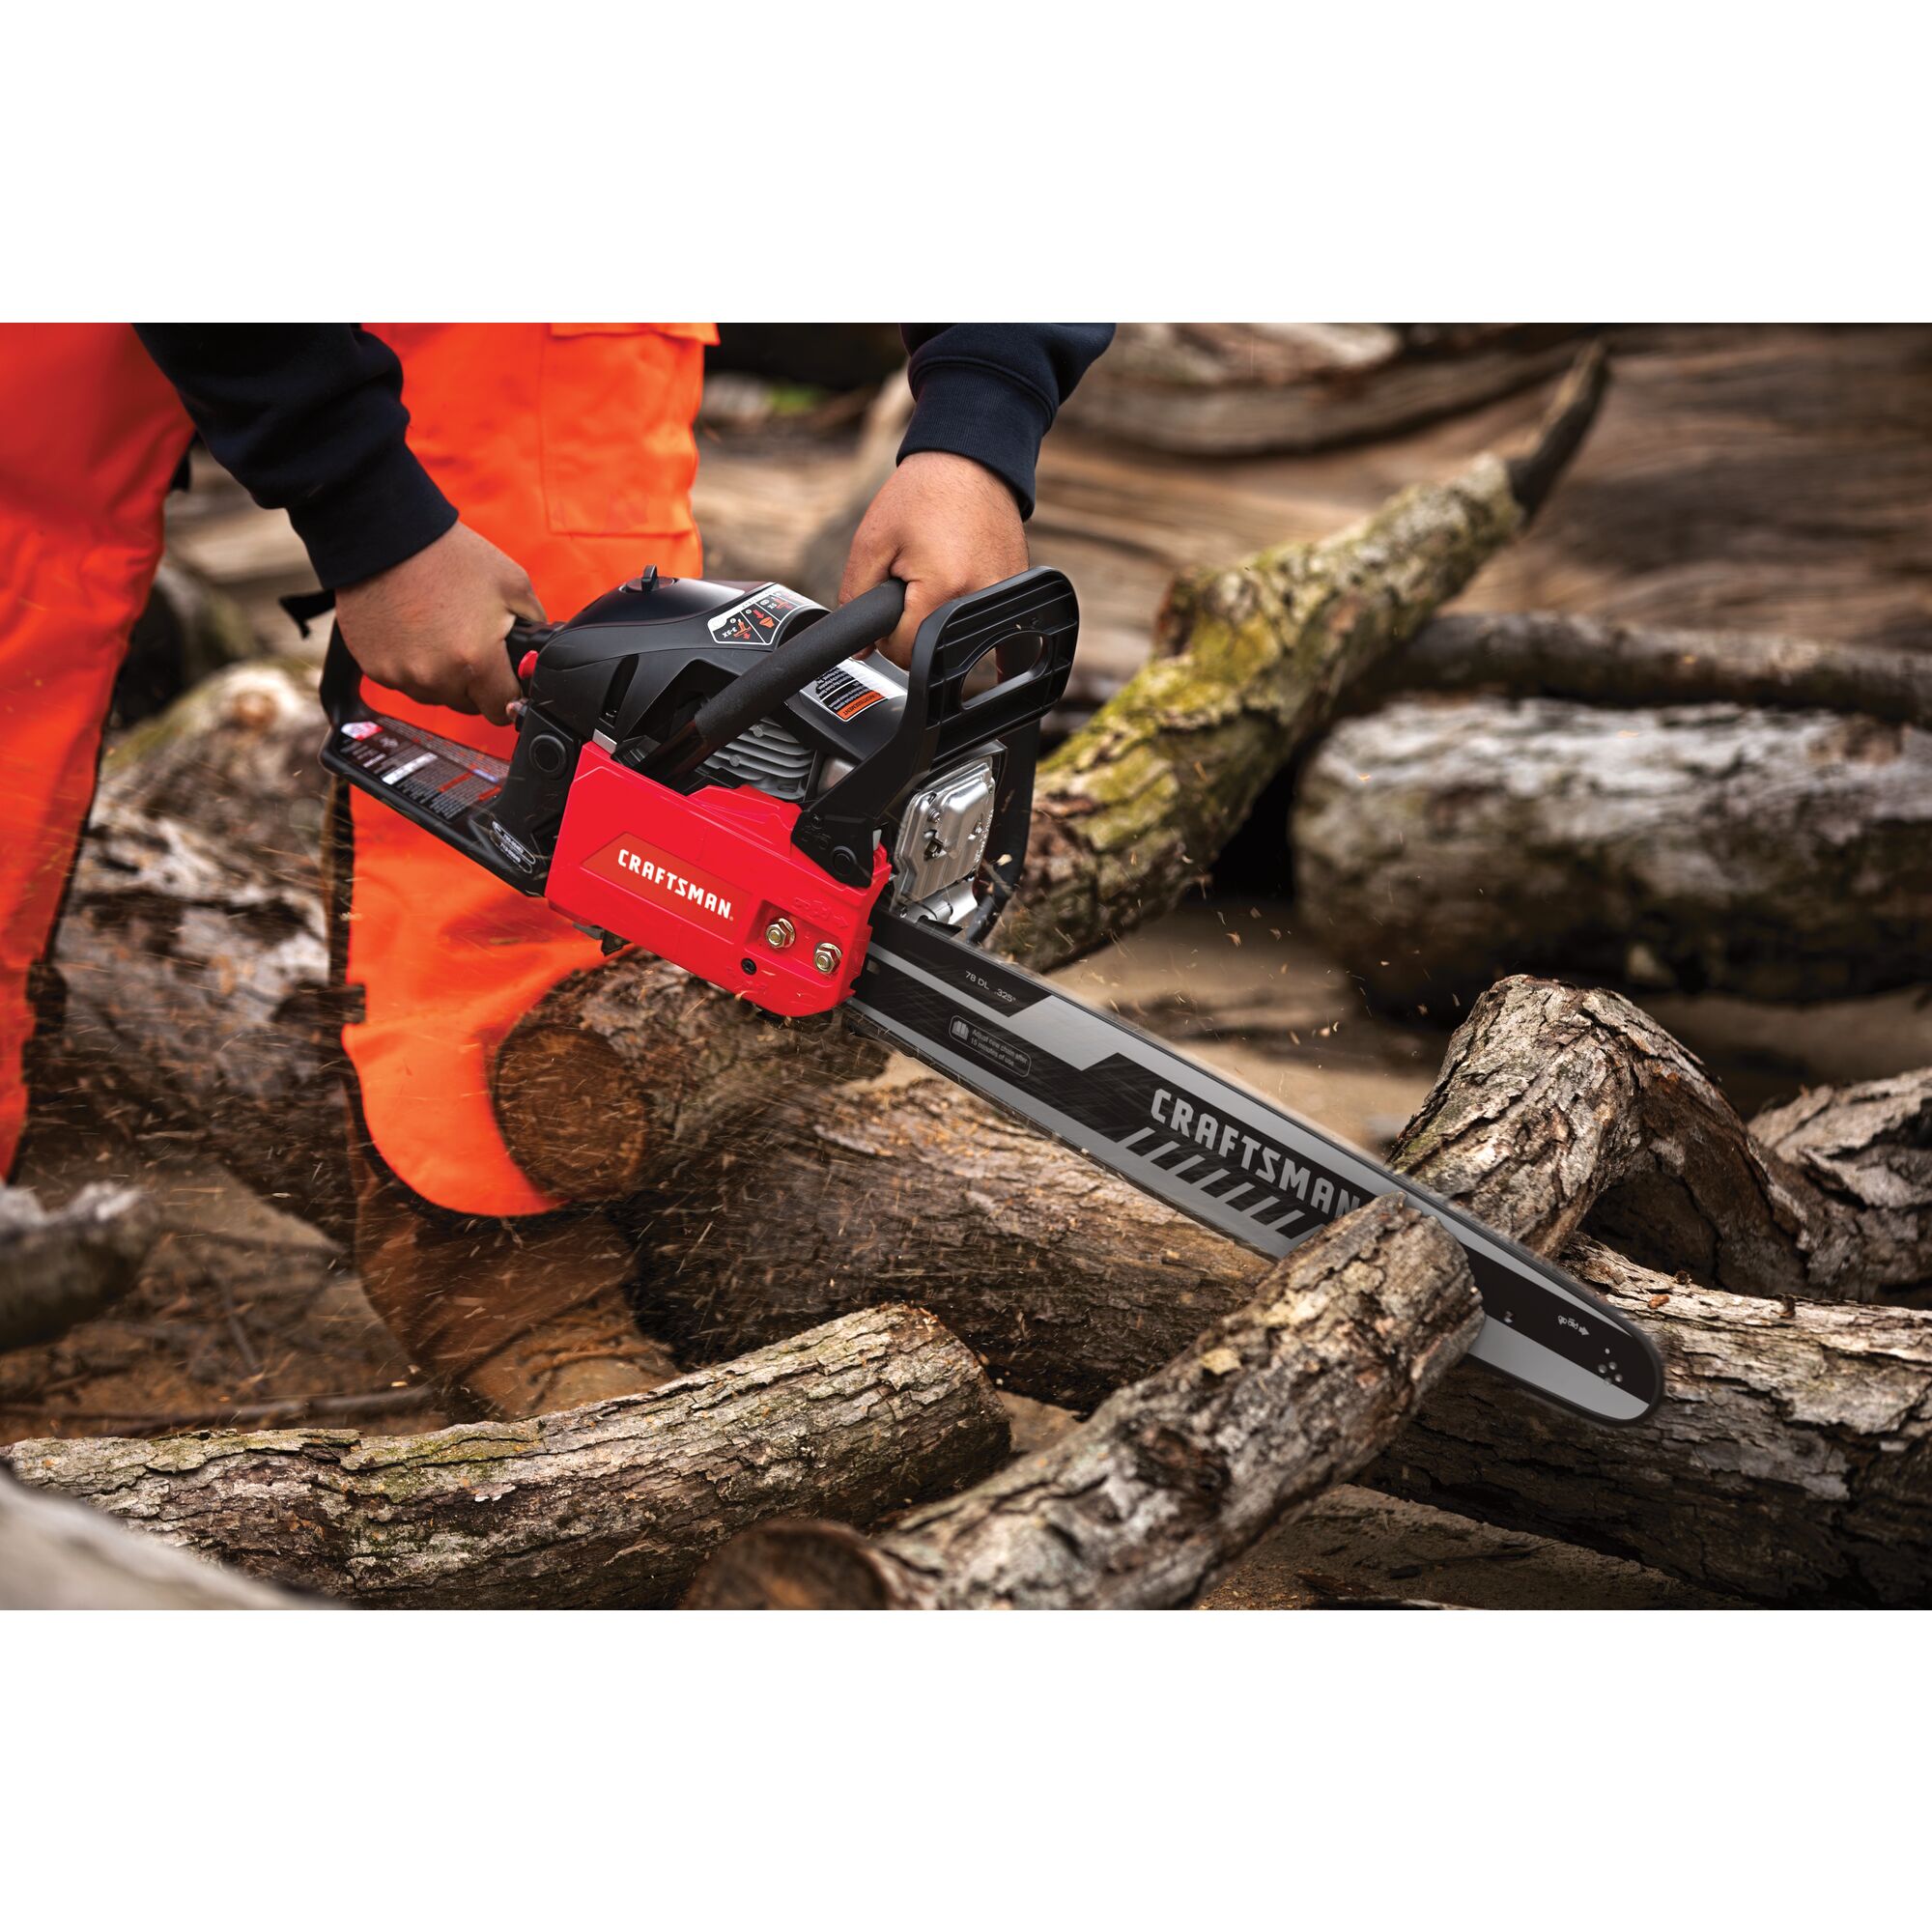 CRAFTSMAN 20-In. 46cc 2-Cycle Chainsaw cutting through wood branches wearing orange pants